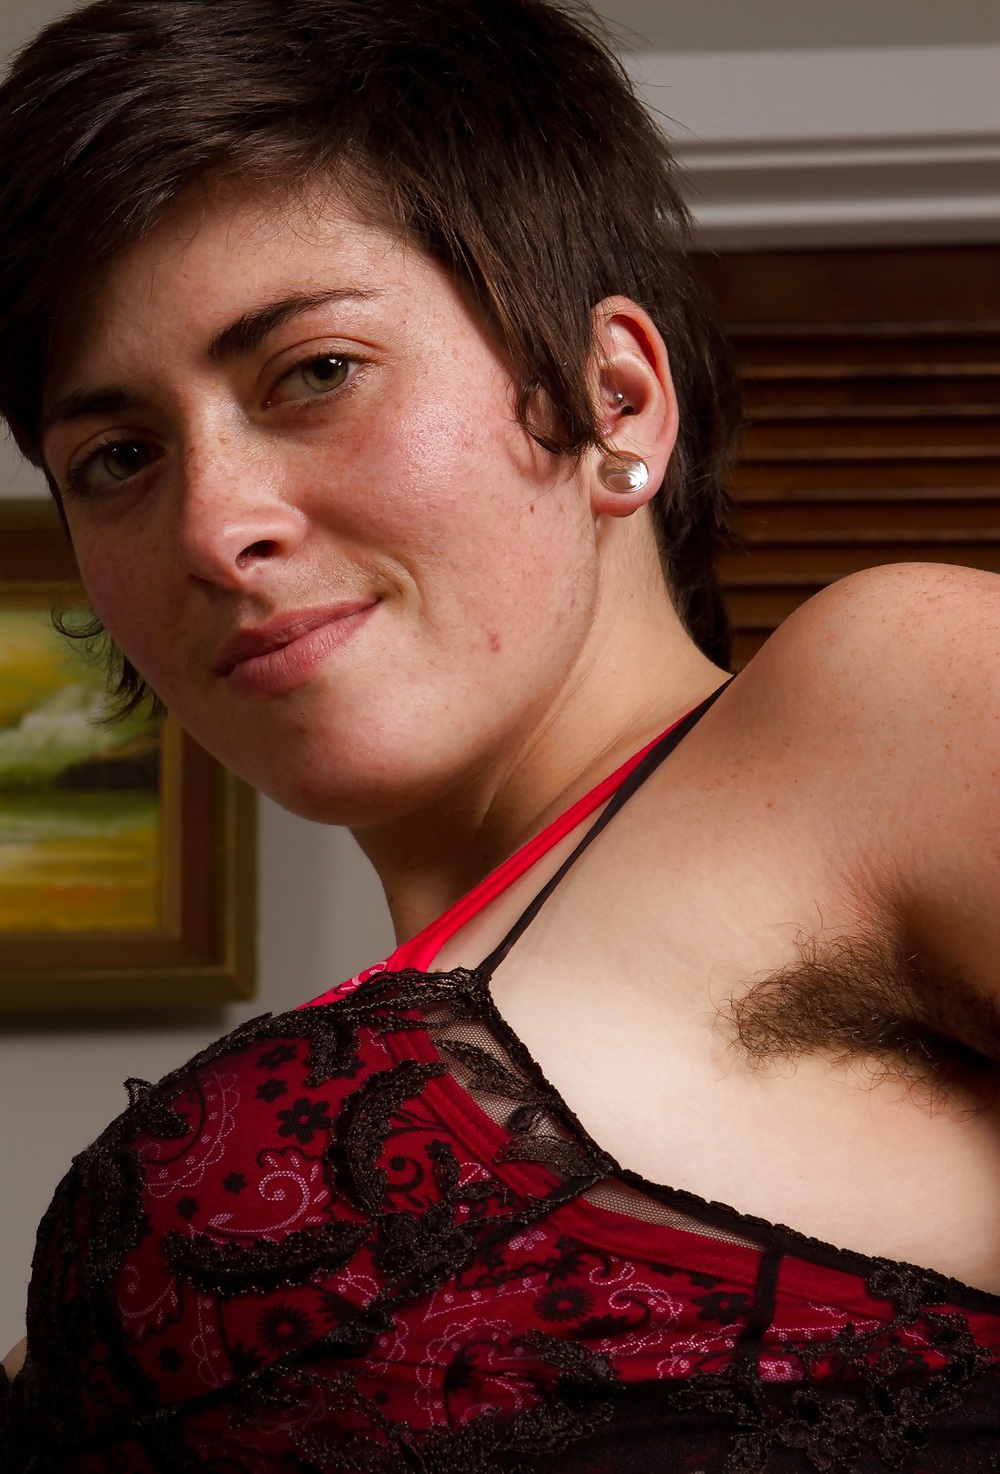 Miscellaneous girls showing hairy, unshaven armpits 3 #36174596